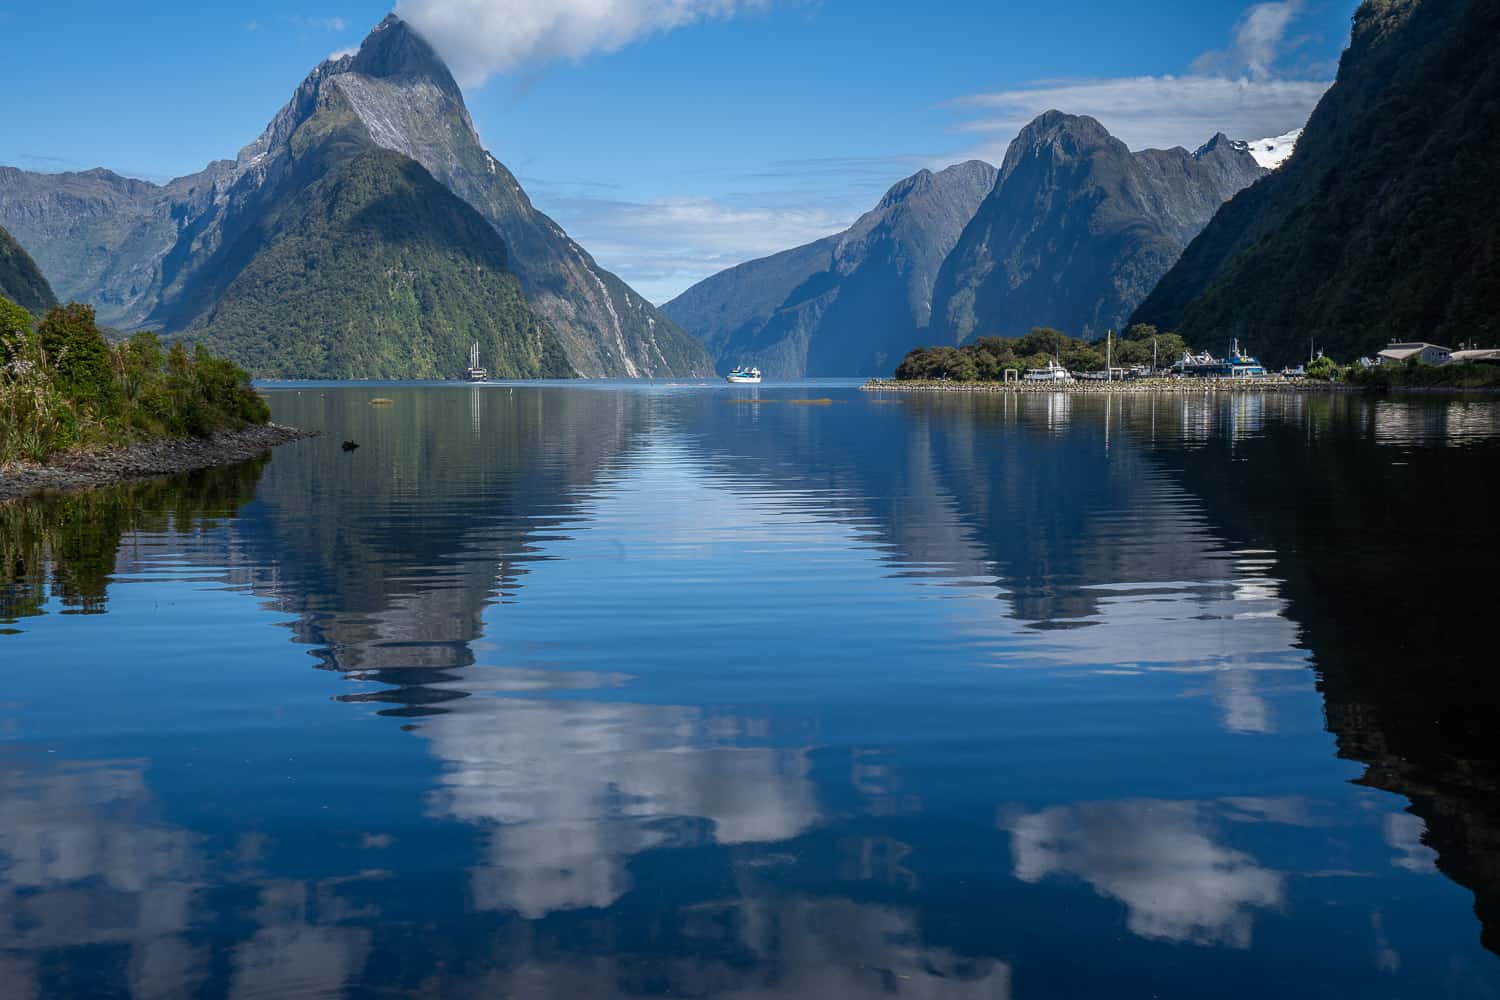 Mitre Peak reflected in the water at Milford Sound